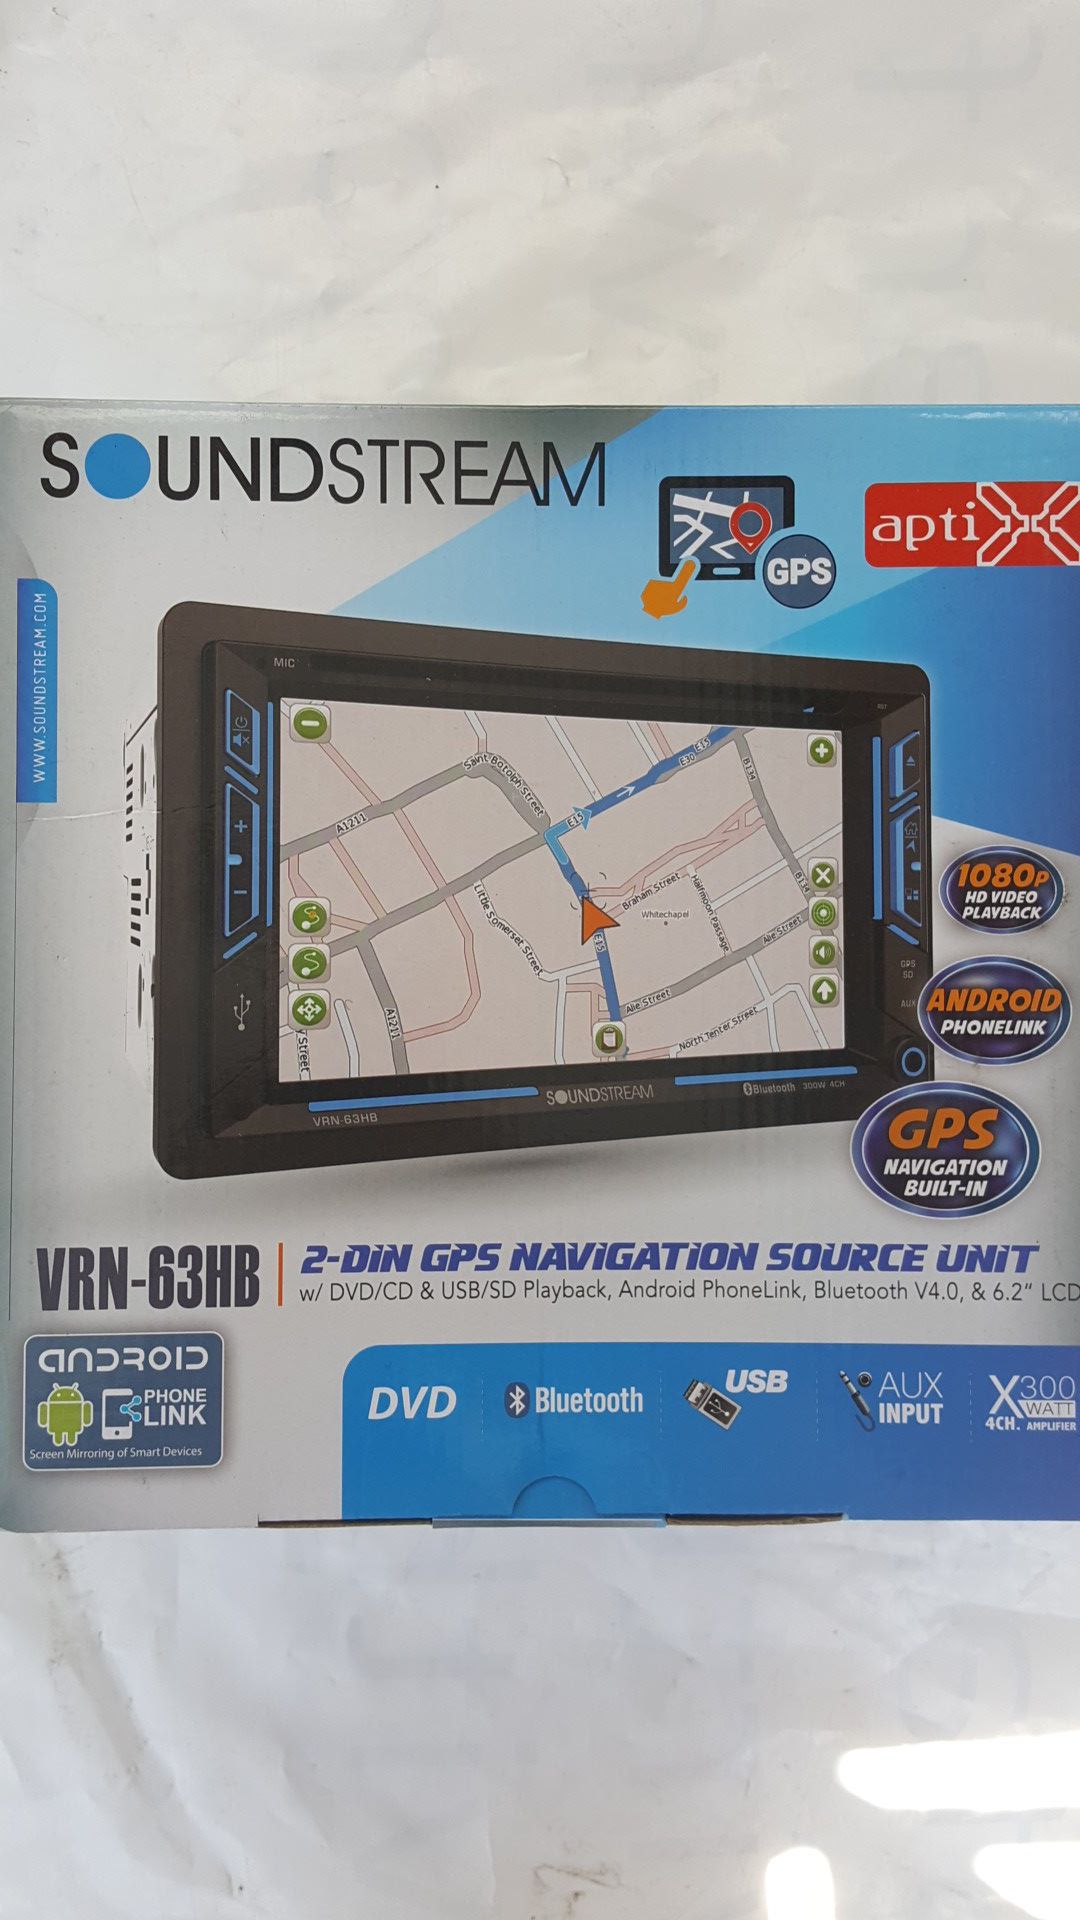 Soundstream VRN-63HB 6.2” Touchscreen 2-DIN DVD, CD/MP3, AM/FM Receiver w/ GPS Navigation & Android PhoneLink